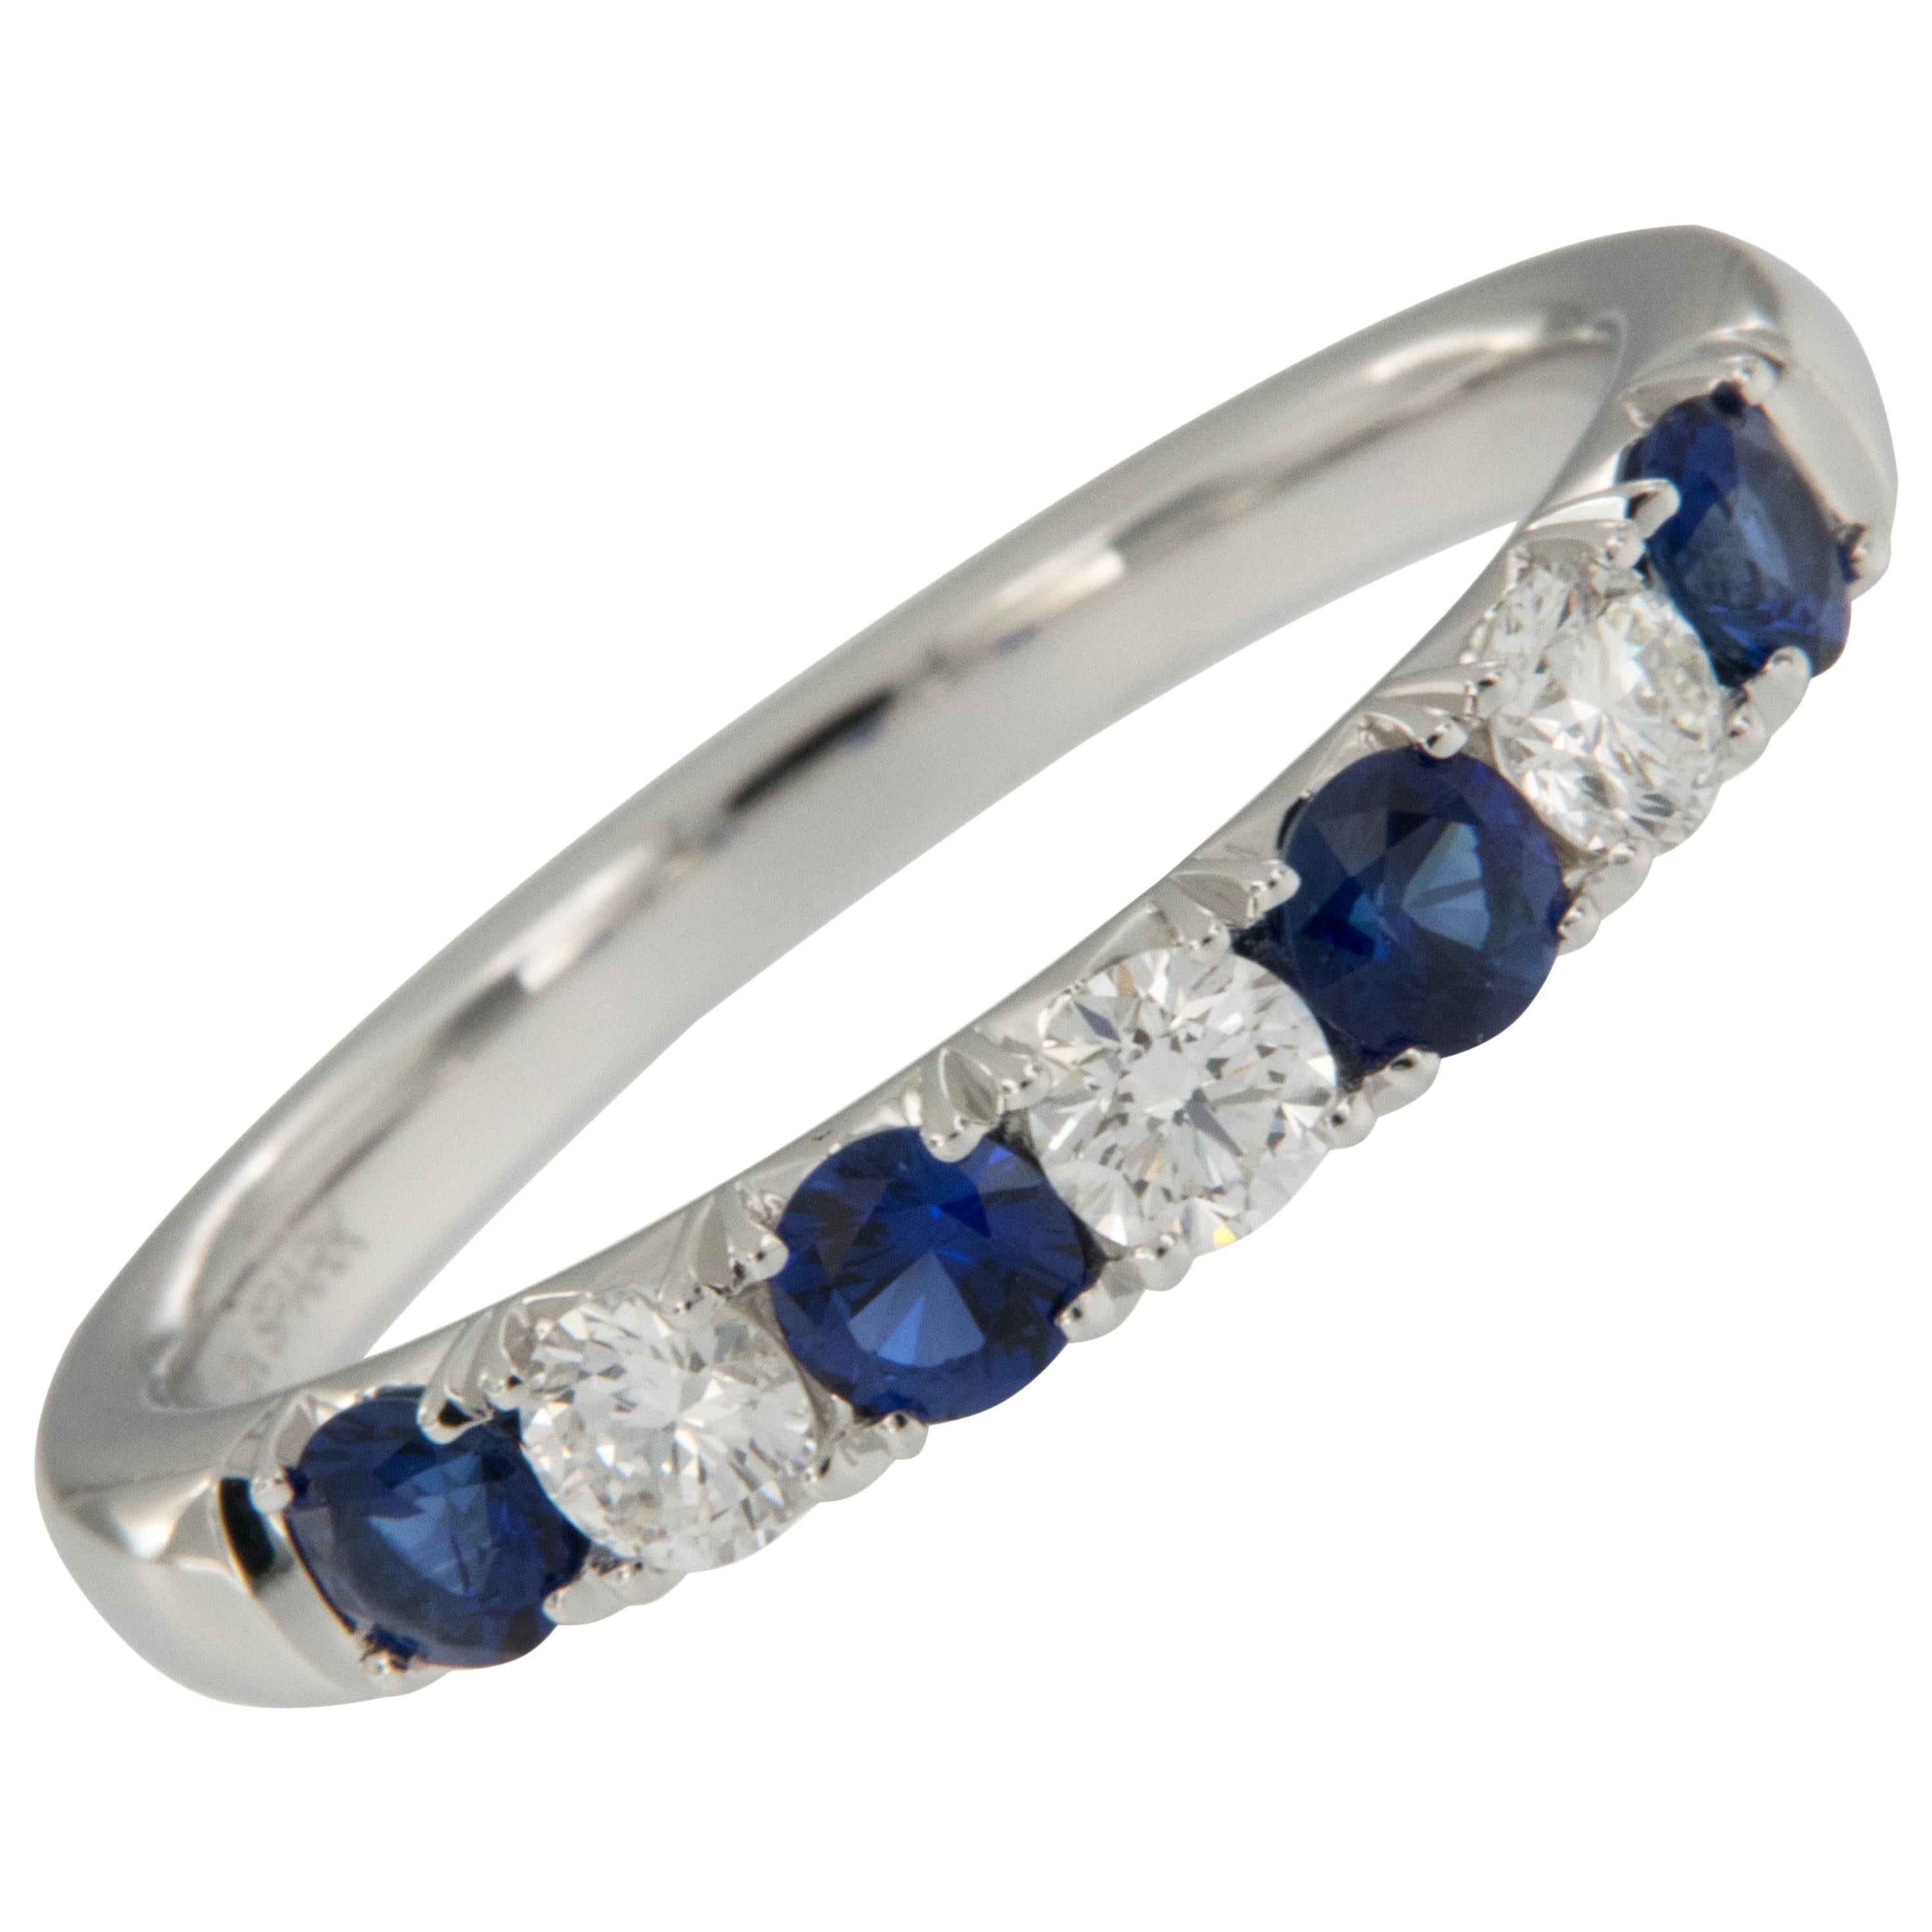 18 Karat White Gold Blue Sapphire & Diamond Stackable Ring by Spark Creations